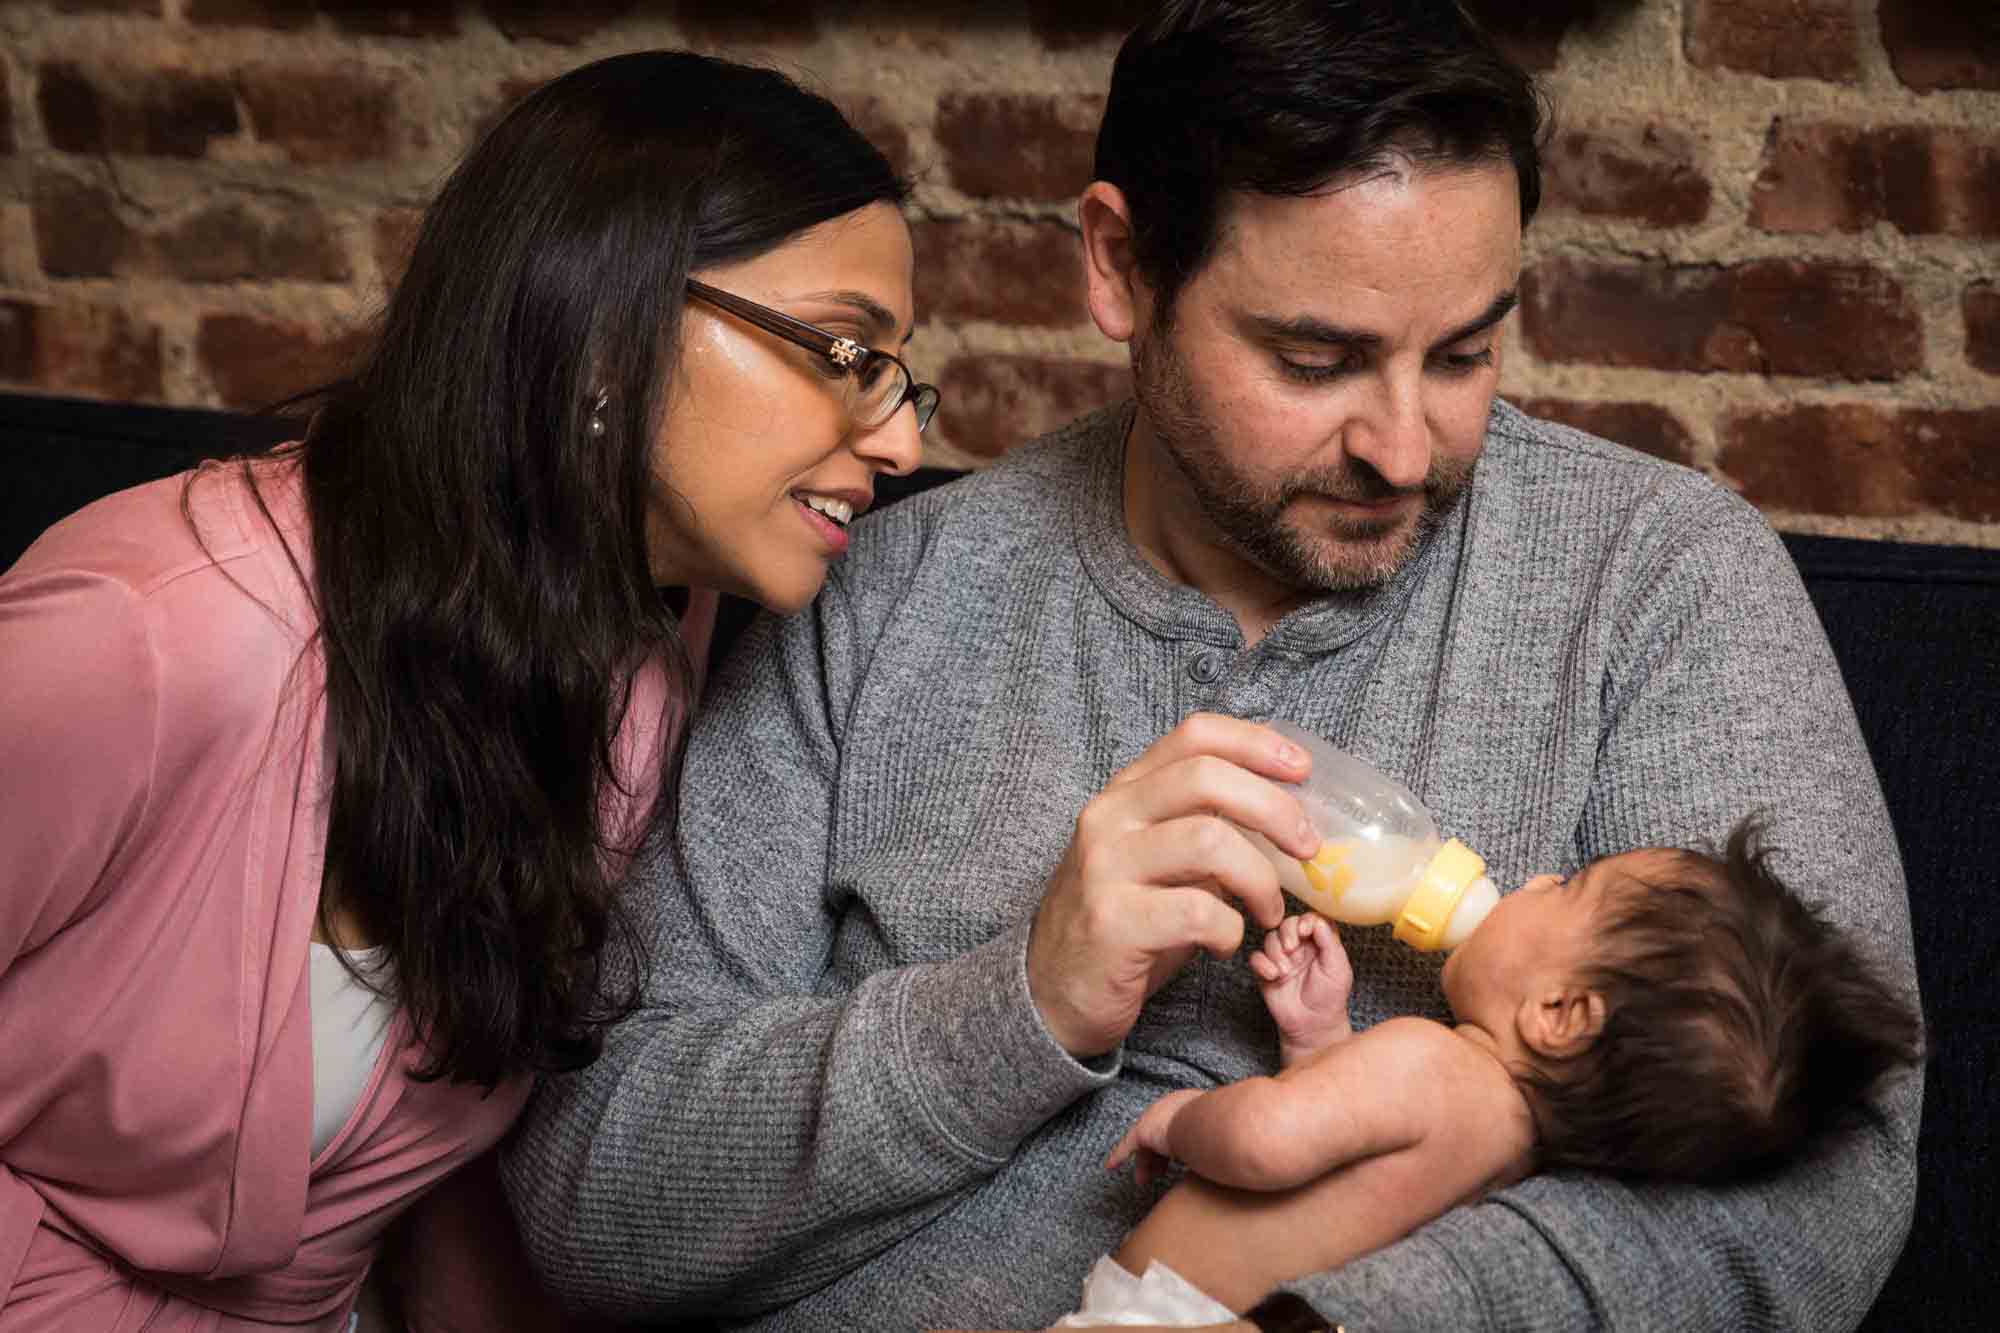 Parents feeding a bottle to a newborn baby during a Christmas-themed newborn photo shoot in NYC